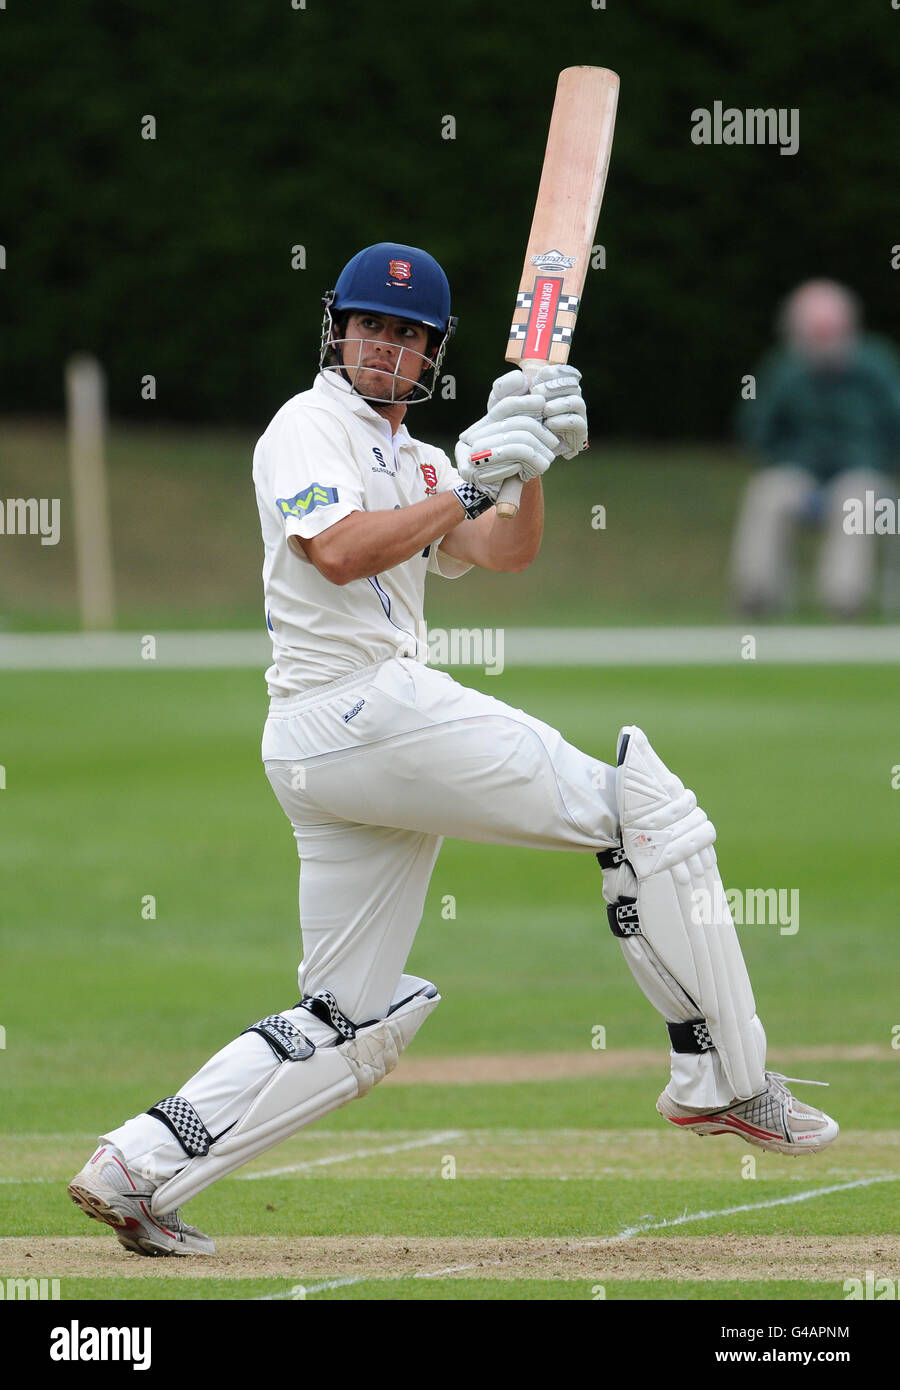 Essex's Alistair Cook in batting action against Surrey Stock Photo